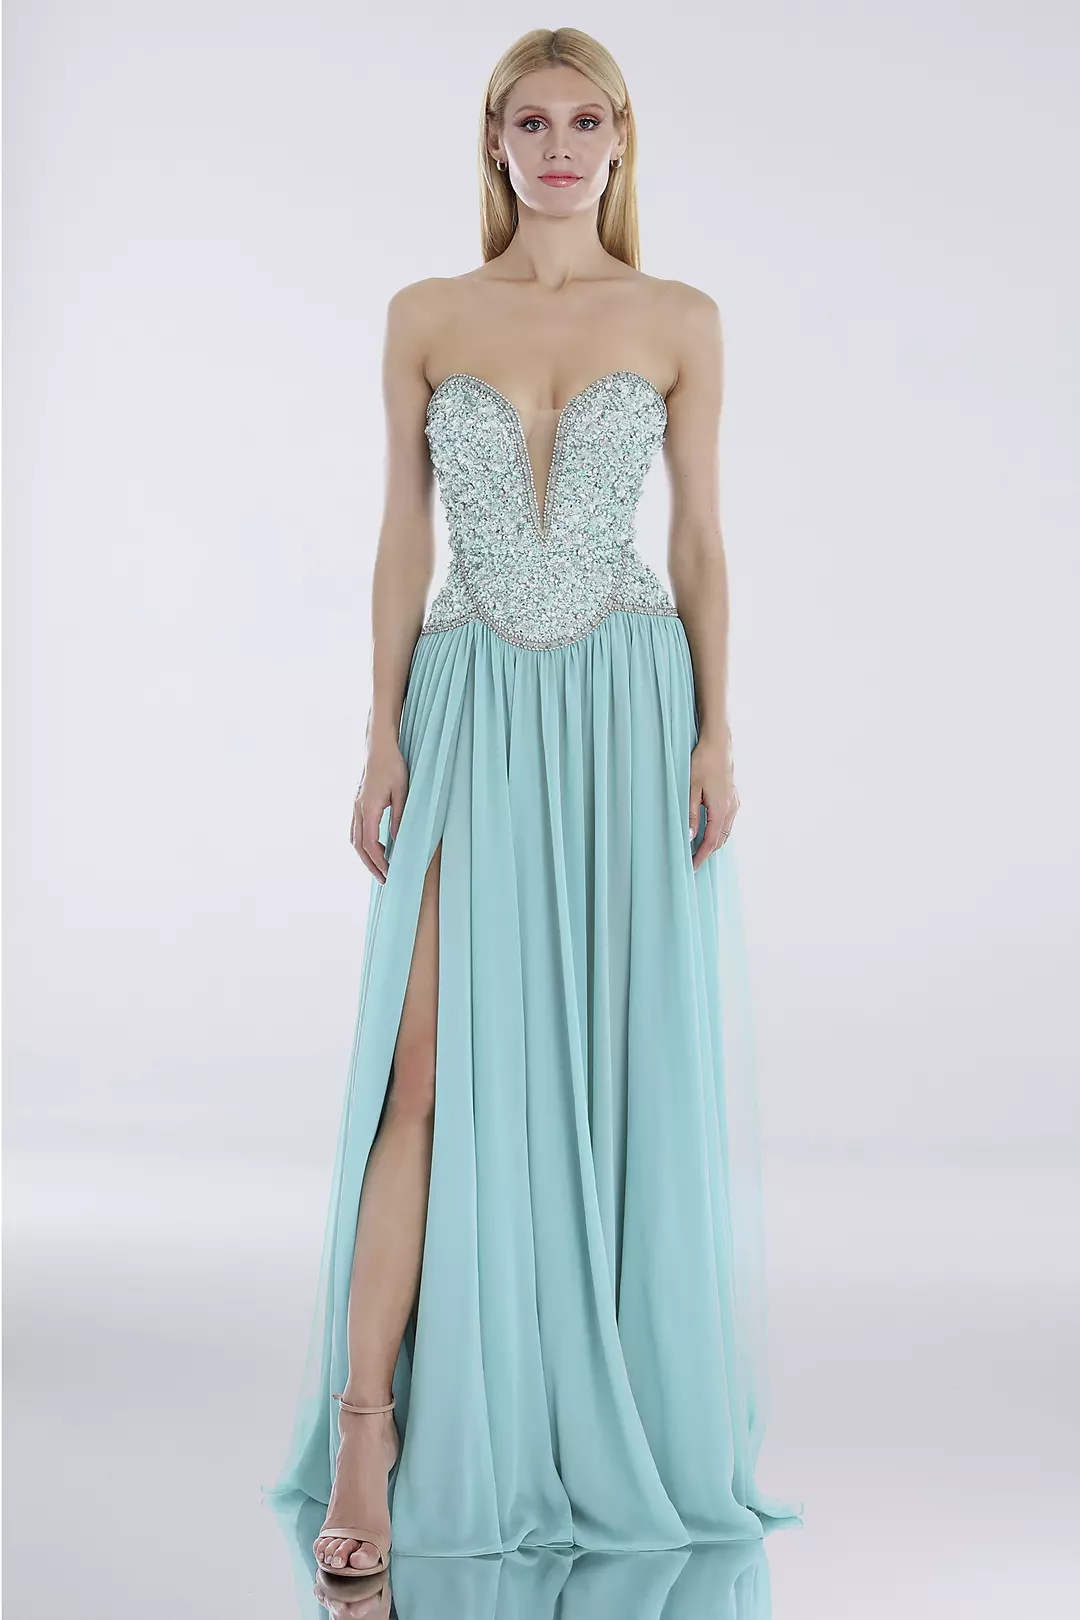 Chiffon Strapless Dress with Sequins and Beading Image